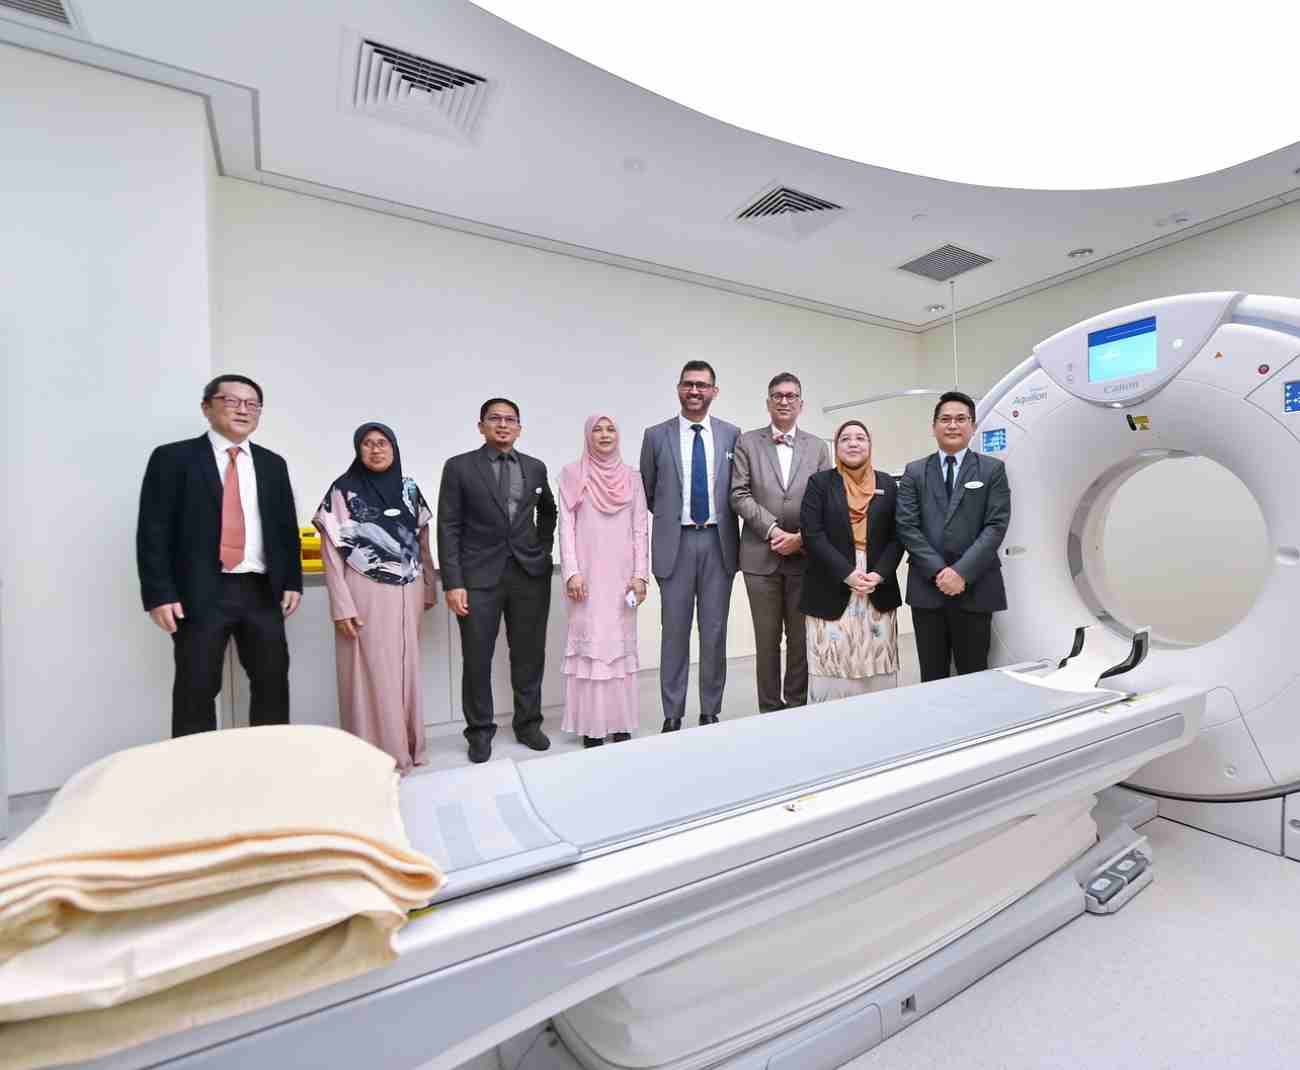 Columbia Asia Hospital - Bukit Jalil (CAH-BKJ) officially opened its doors today, marking the 18th hospital in Malaysia for the Columbia Asia group. 